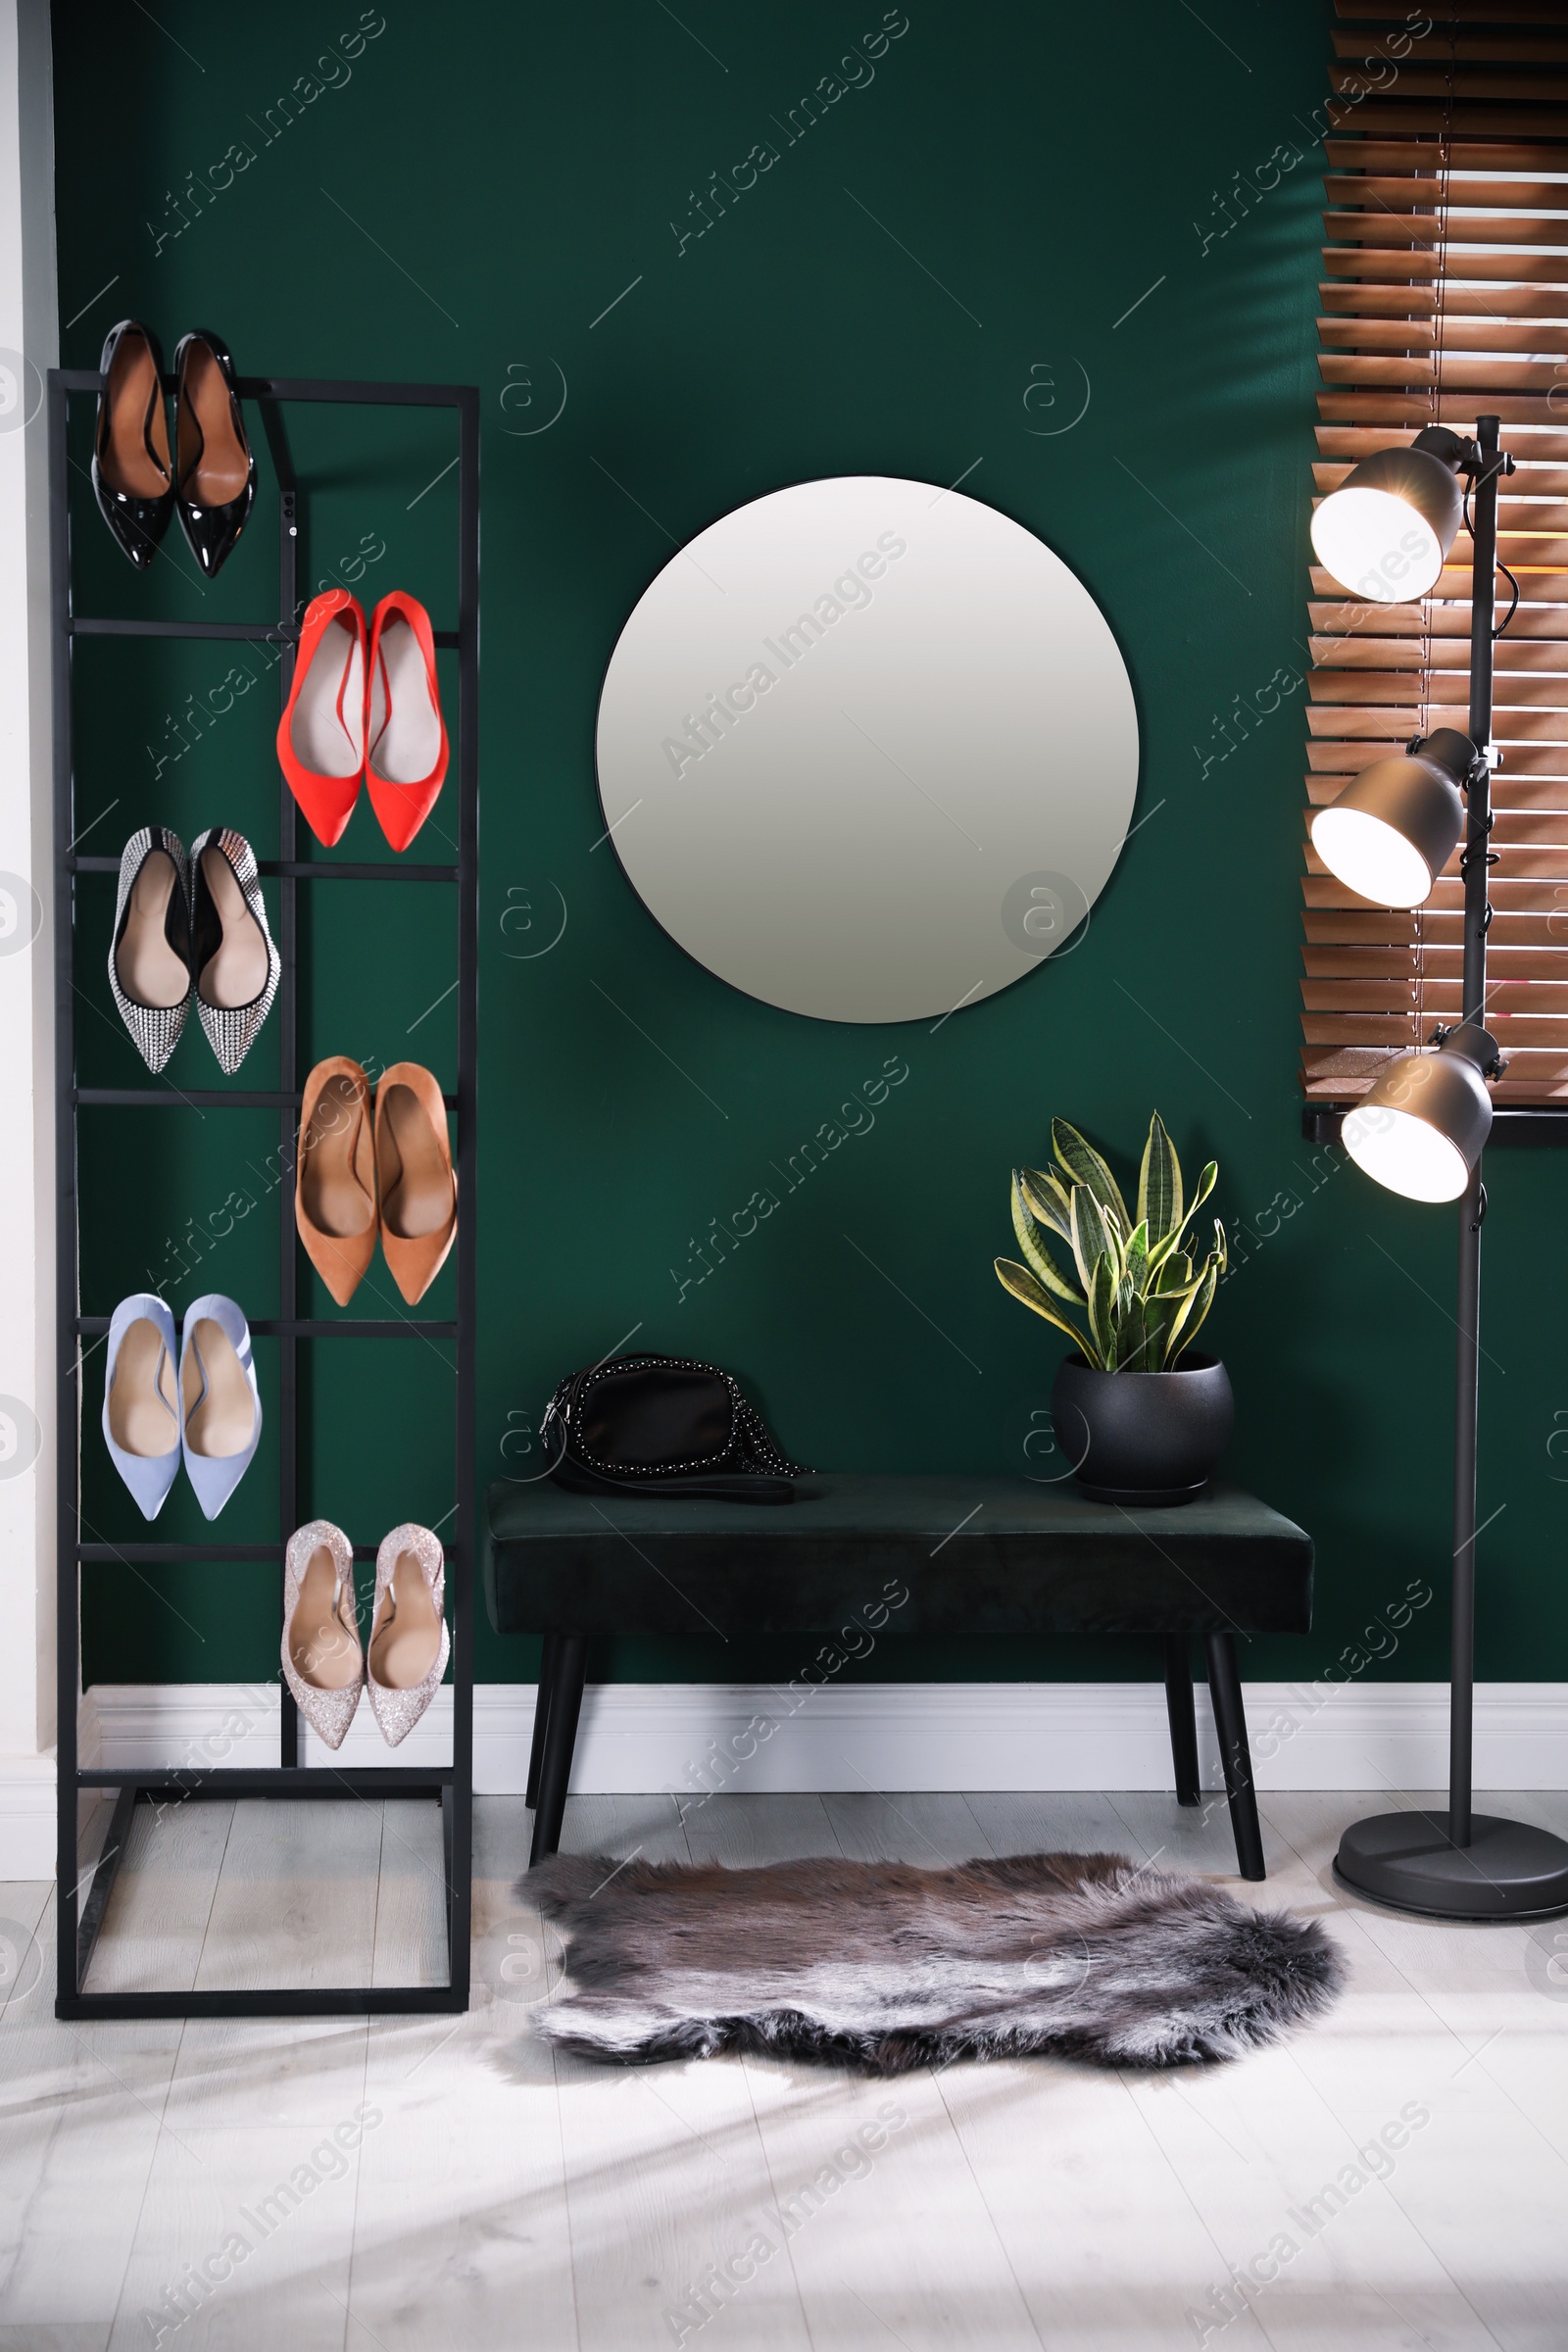 Photo of Hallway interior with storage rack, stylish women's shoes and bench